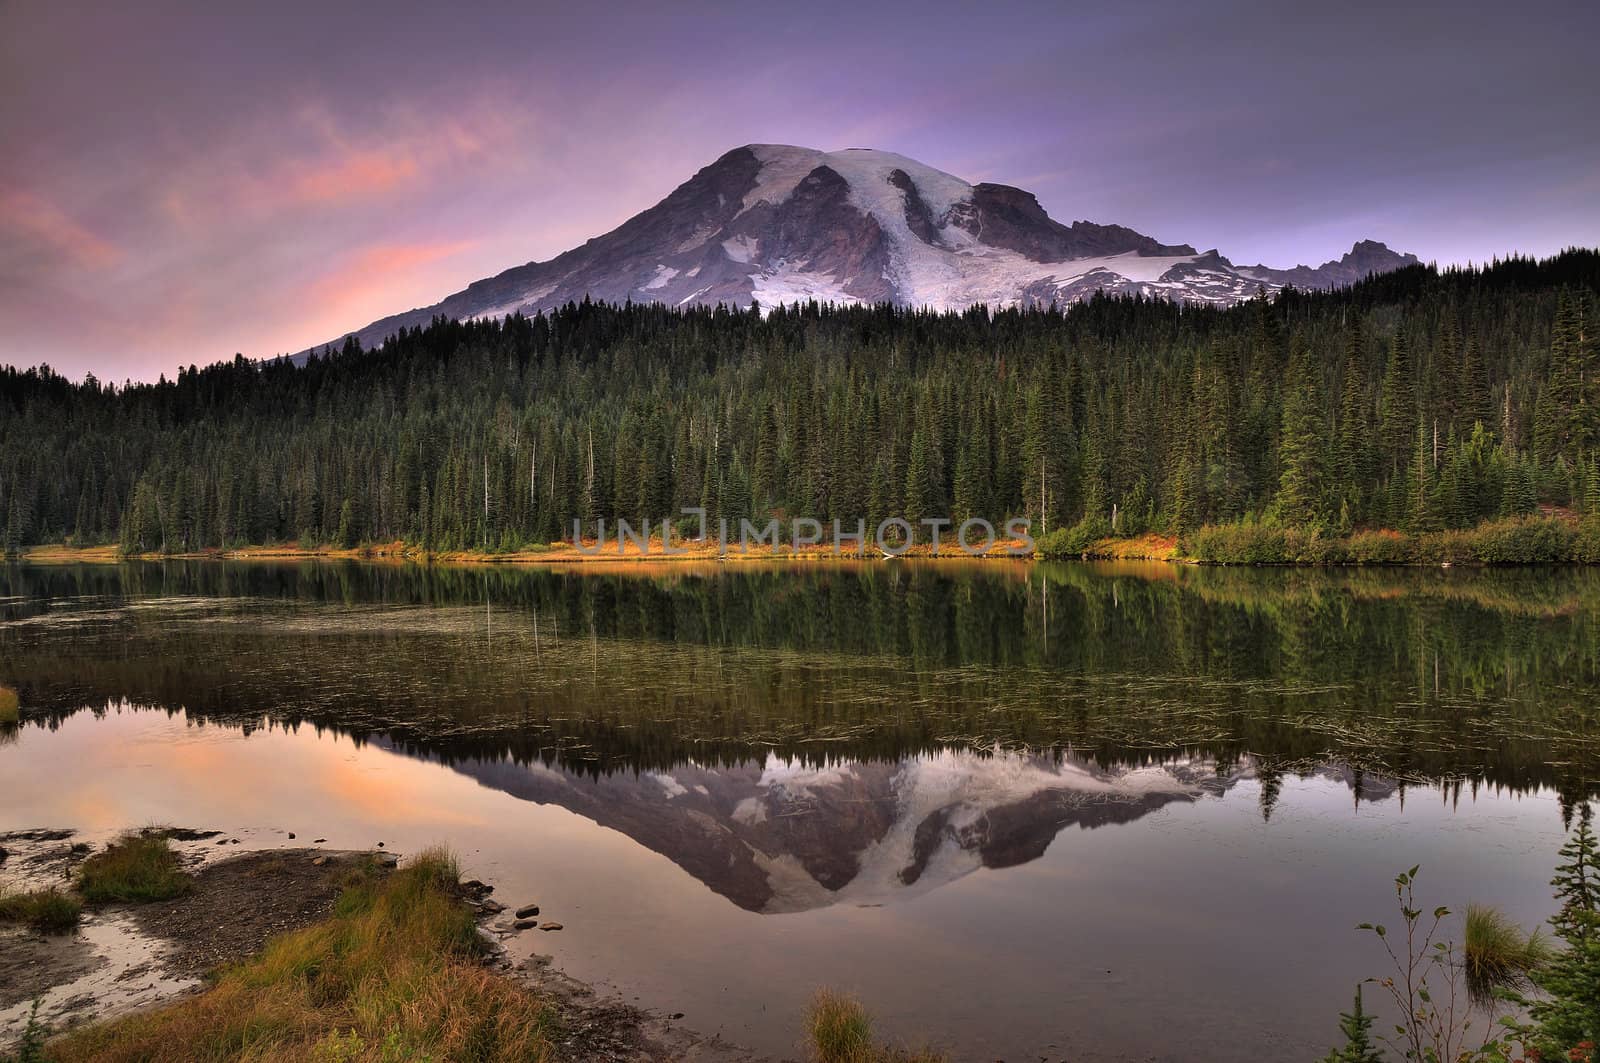 Mount Rainier reflected across the reflection lakes at dusk under a dramatic sky